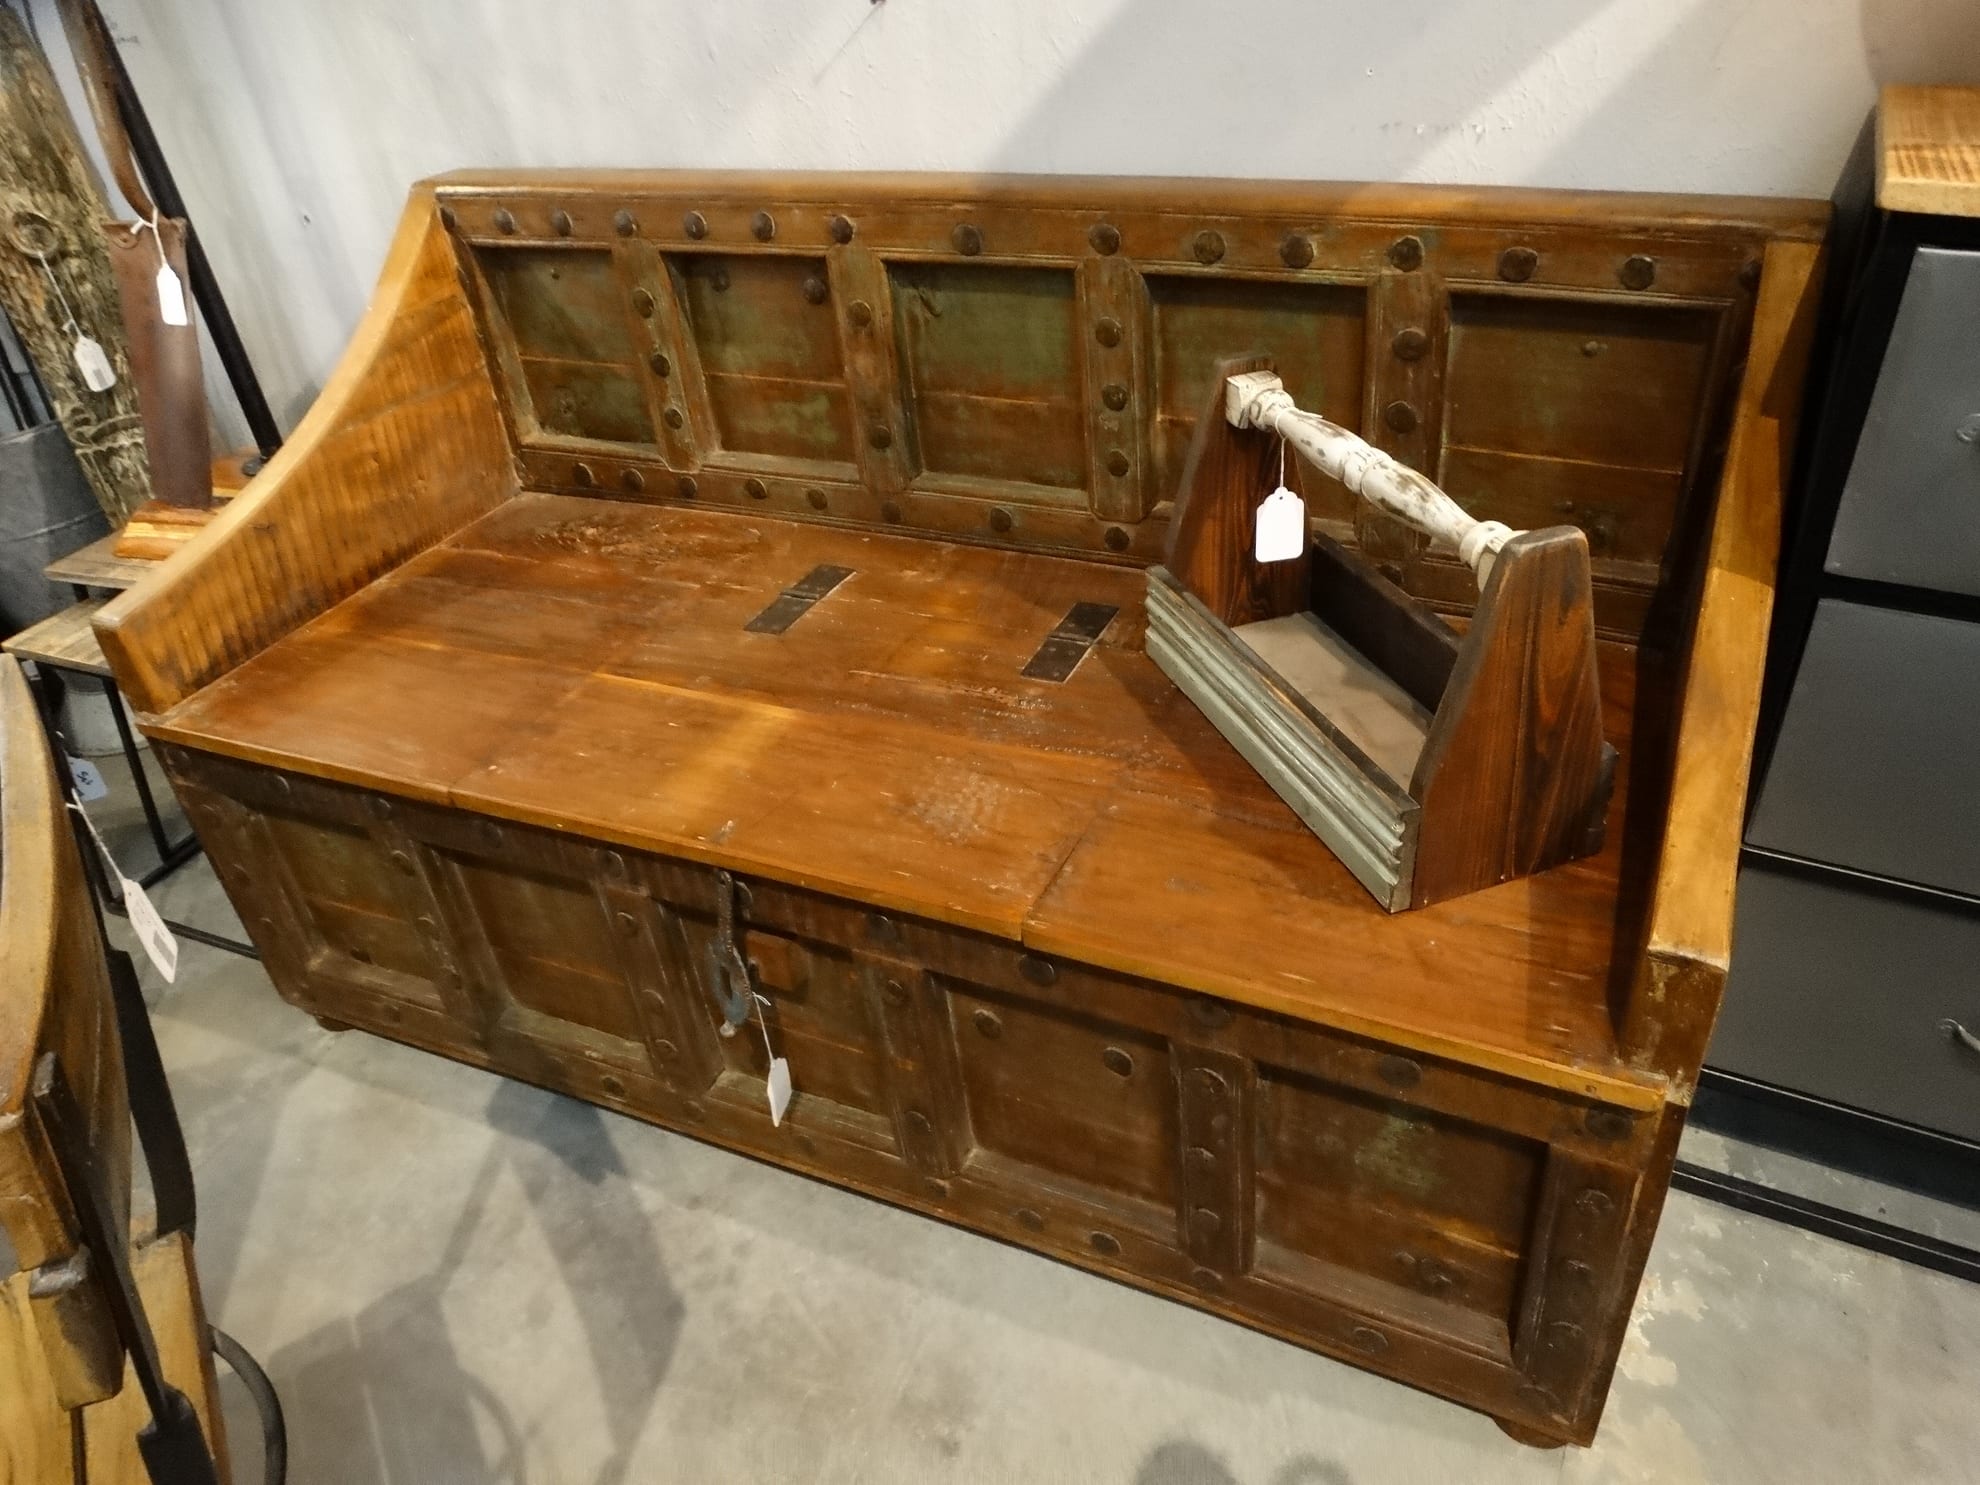 Wooden Bench with Back and Trunk Storage